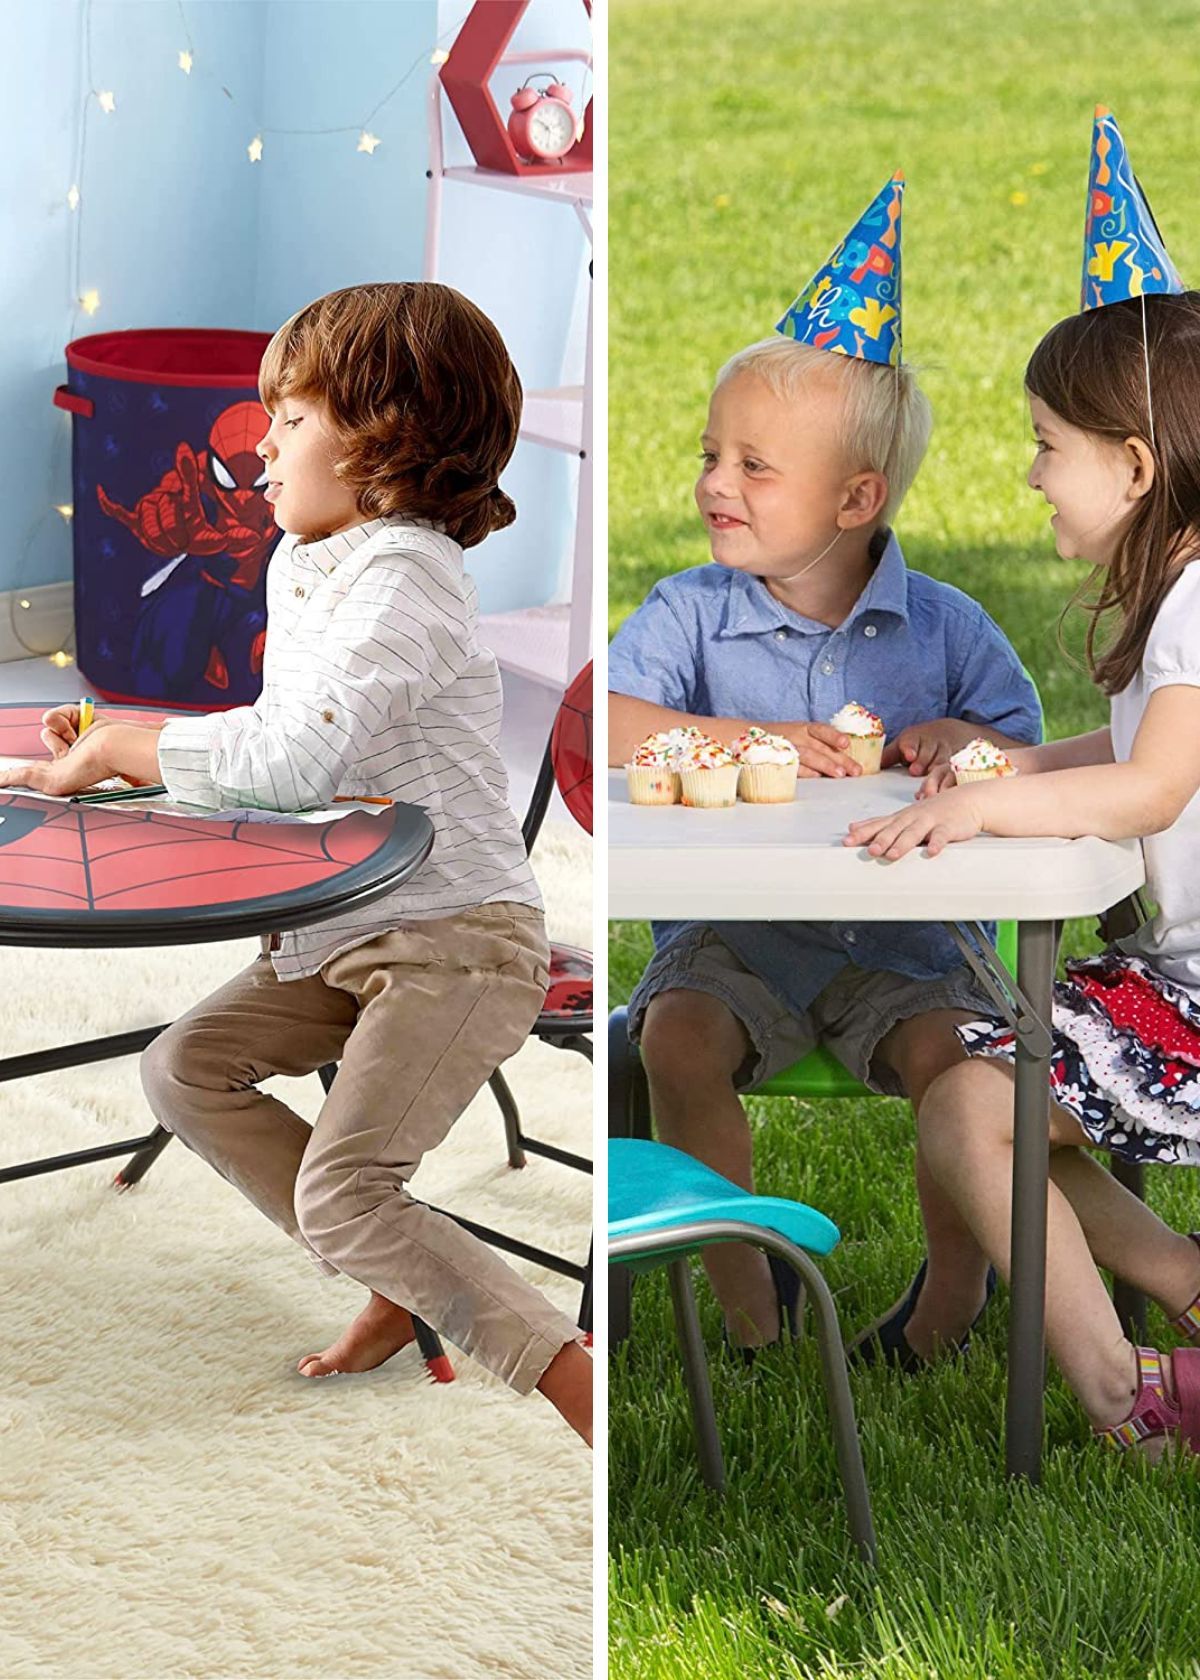 Make Playtime Easier With The 5 Best Kids' Folding Tables!